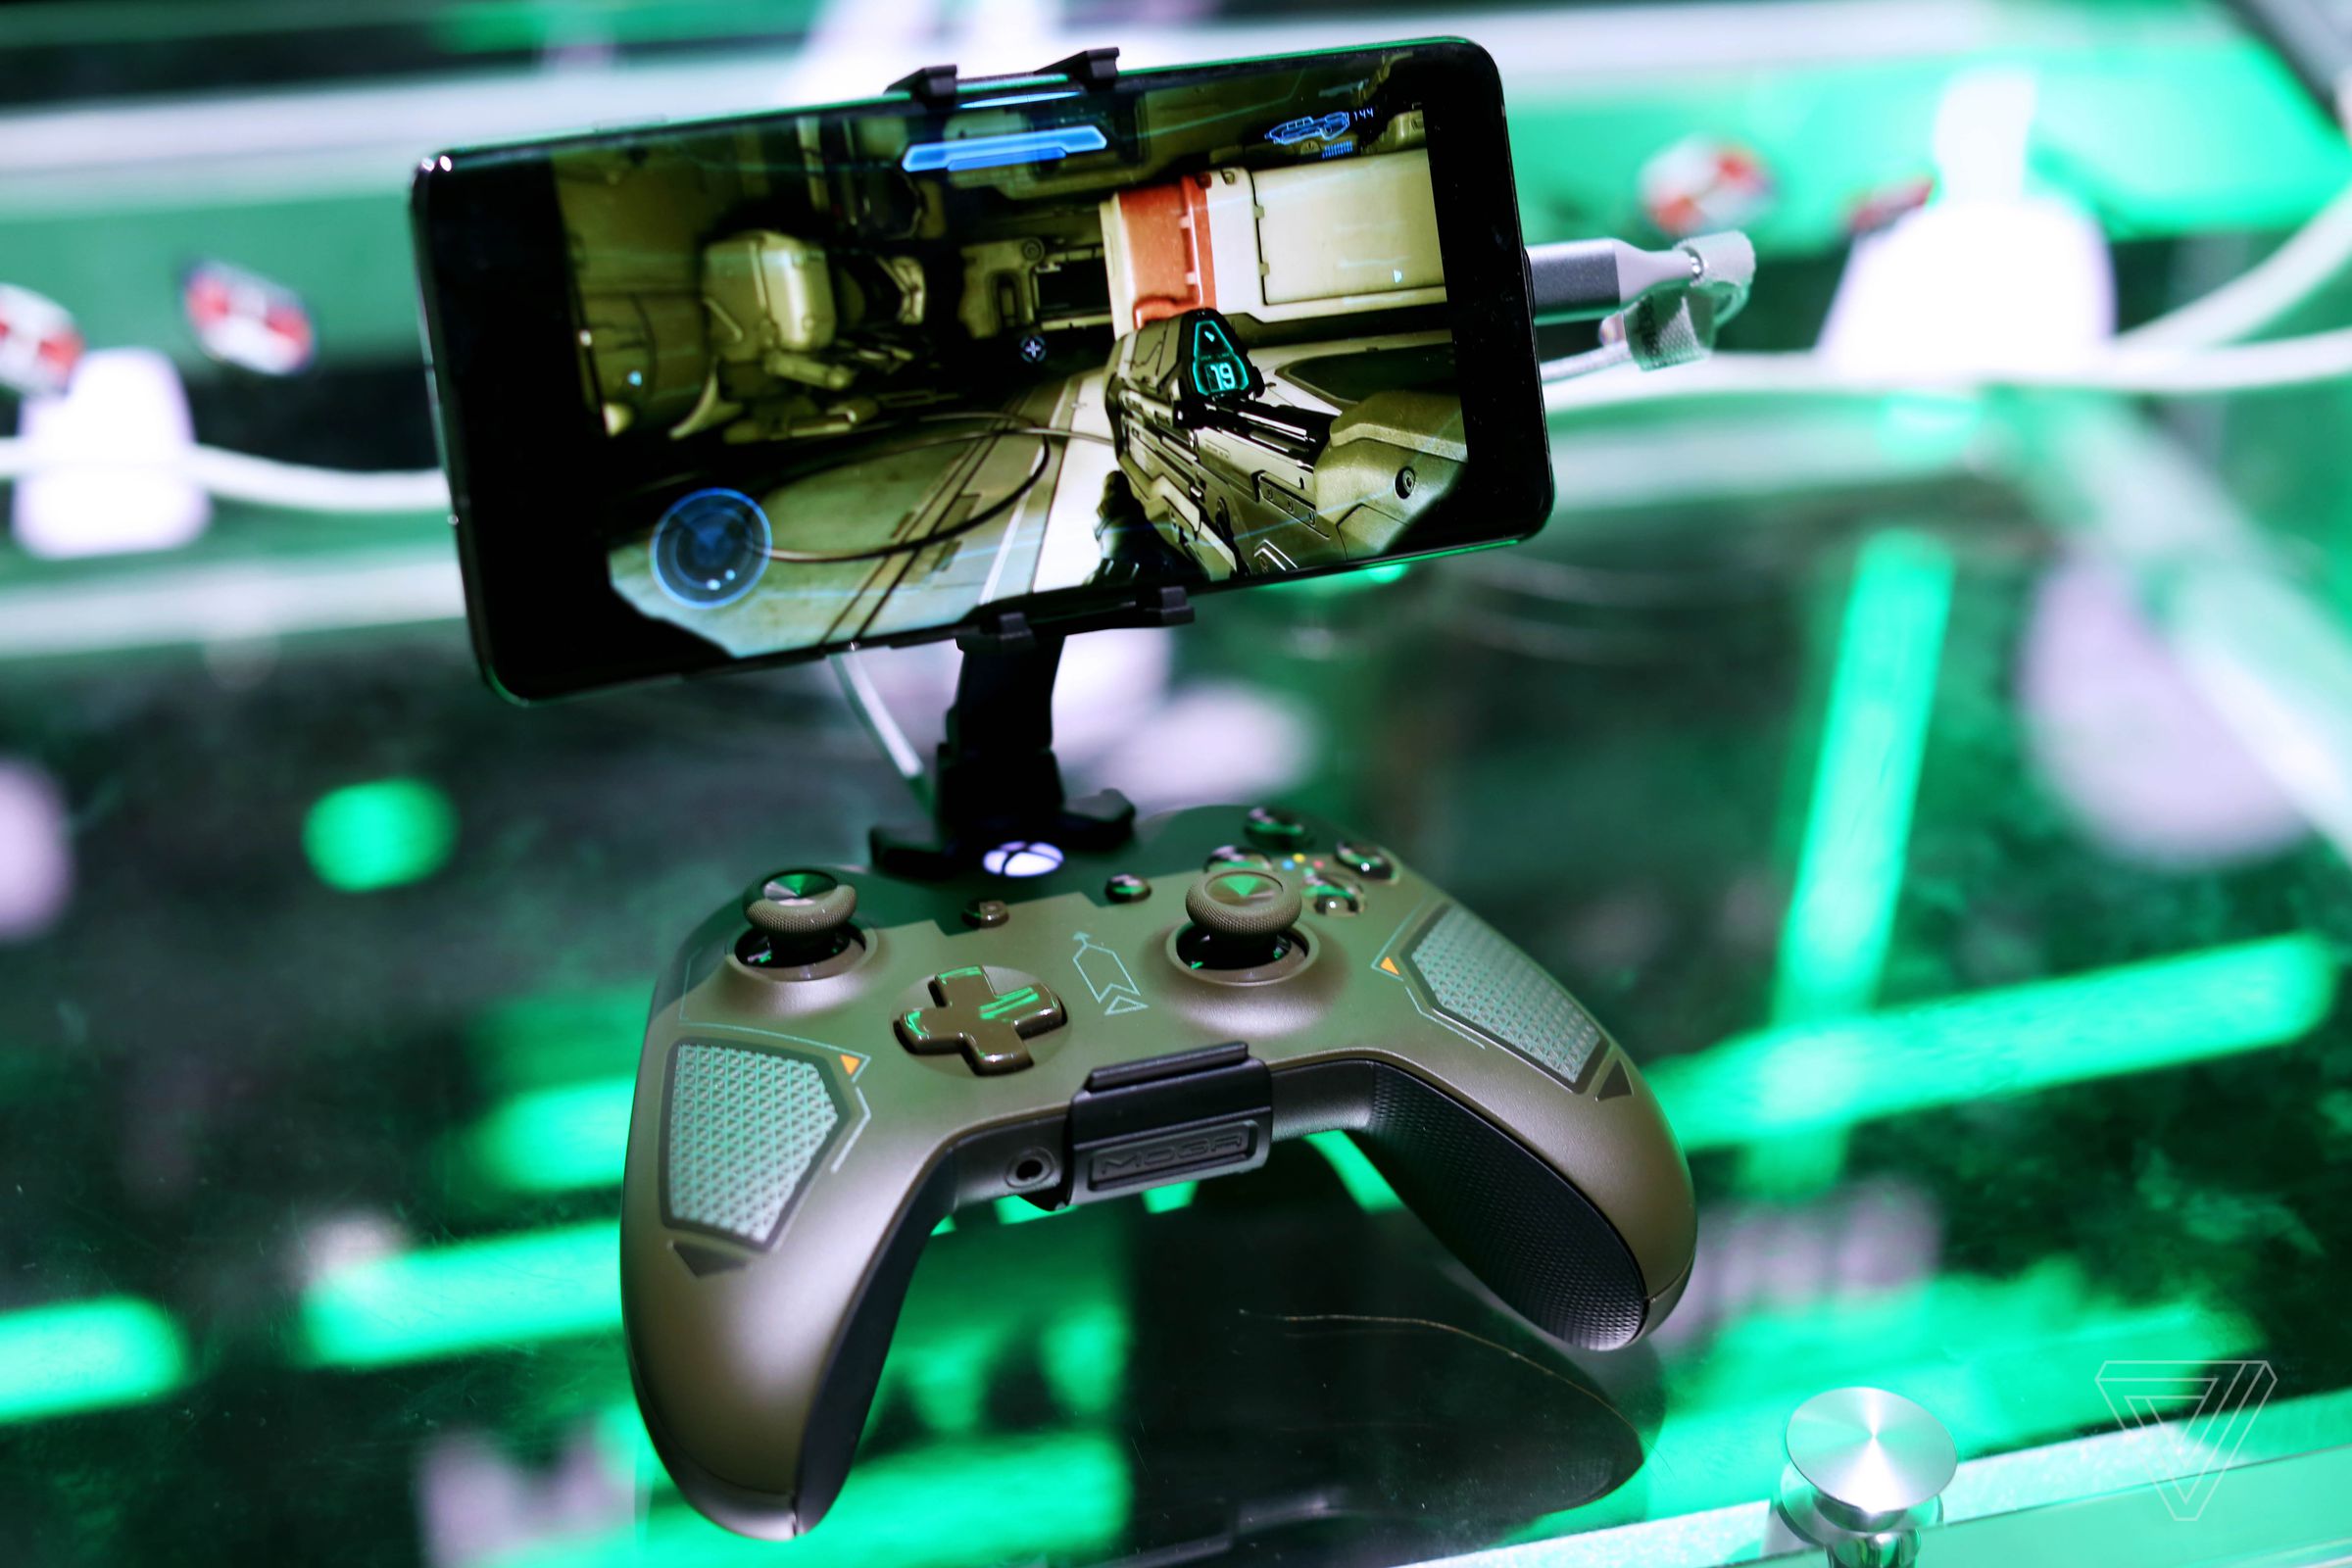 Microsoft promises to let you stream major Xbox games straight to your phone.